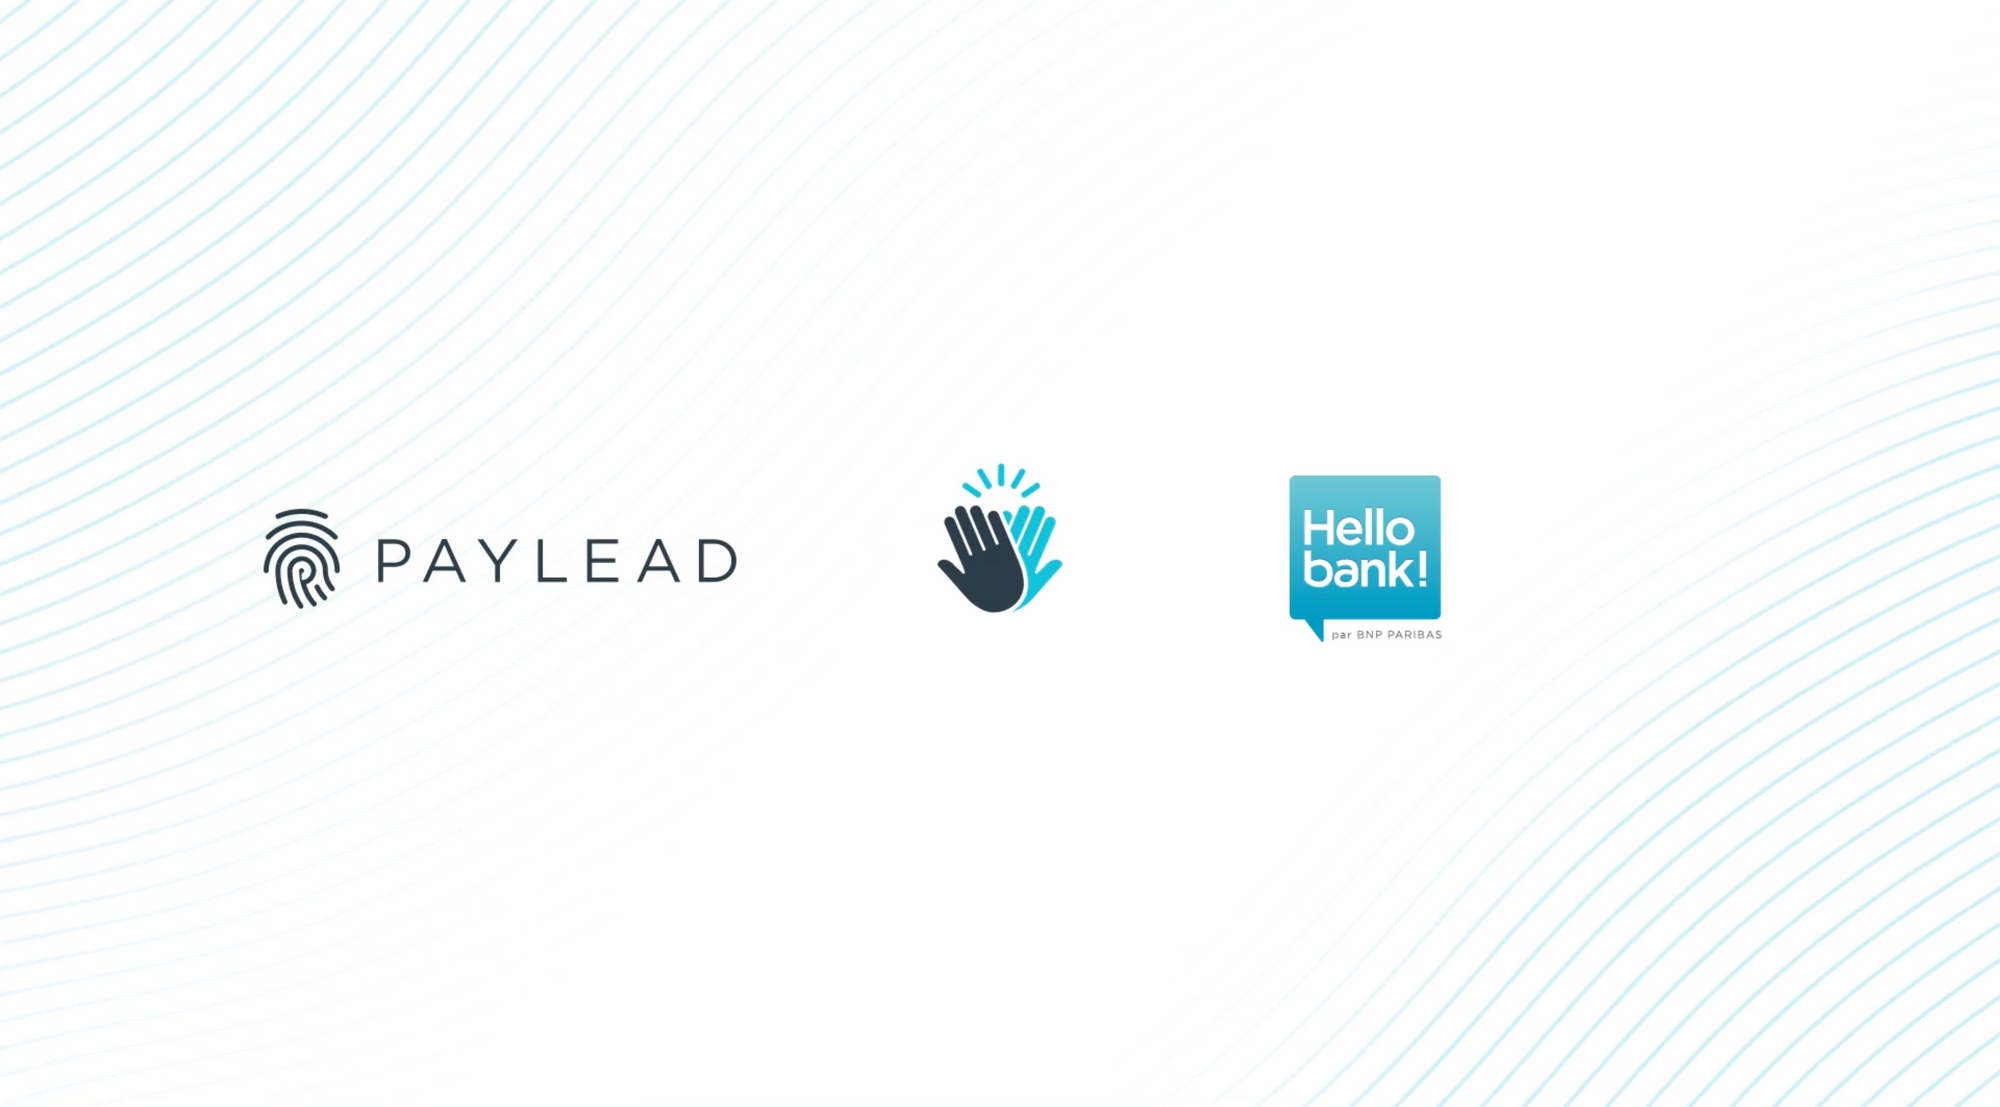 Hello bank! launches its automatic cashback program "Hello Extra" in partnership with PayLead